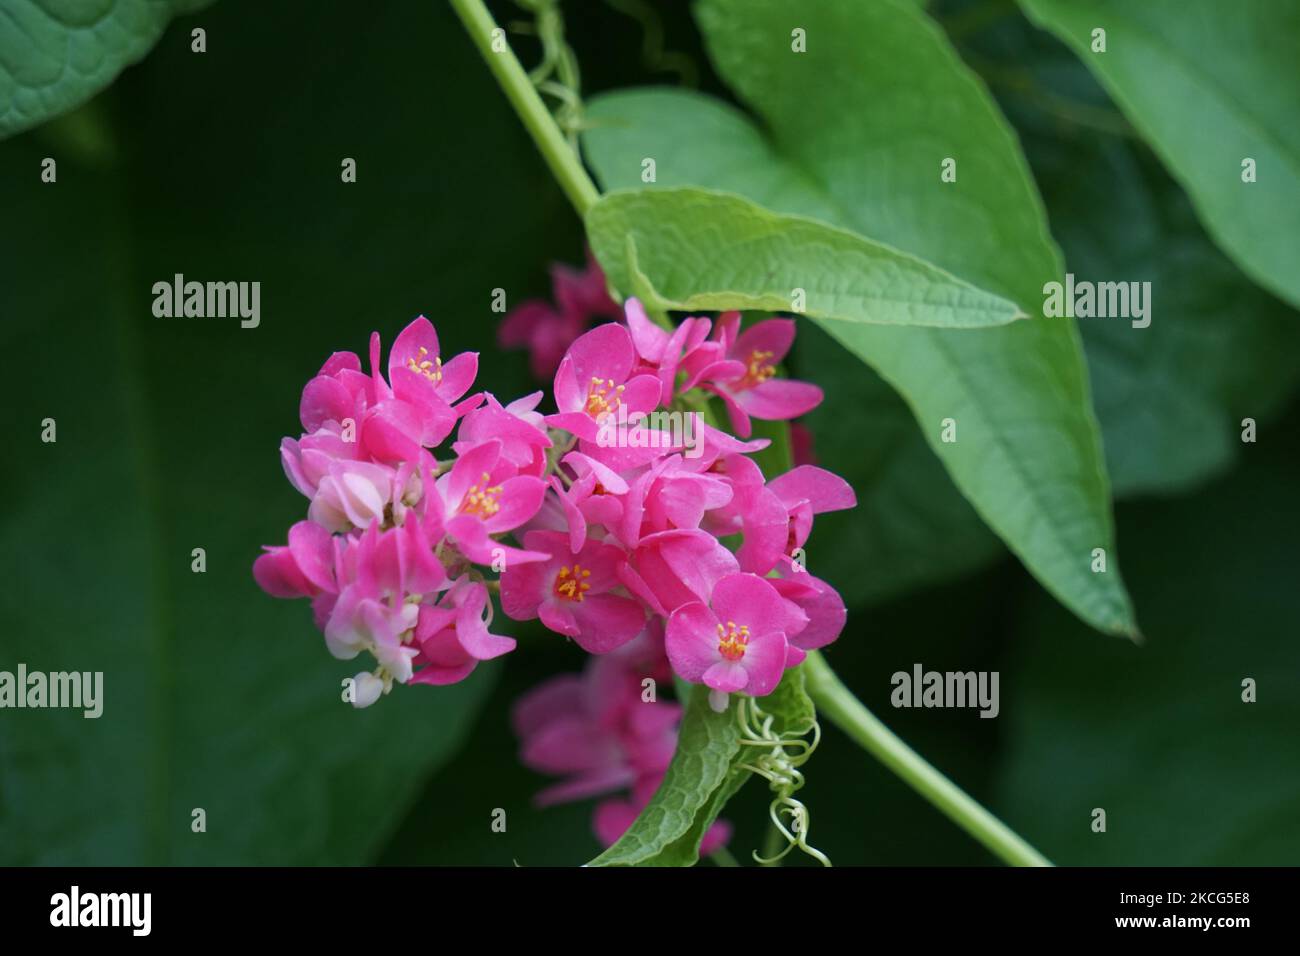 Mexican creeper (Also called Antigonon leptopus). This plant is good for the common flu (influenza) and period pains and many other symptoms Stock Photo